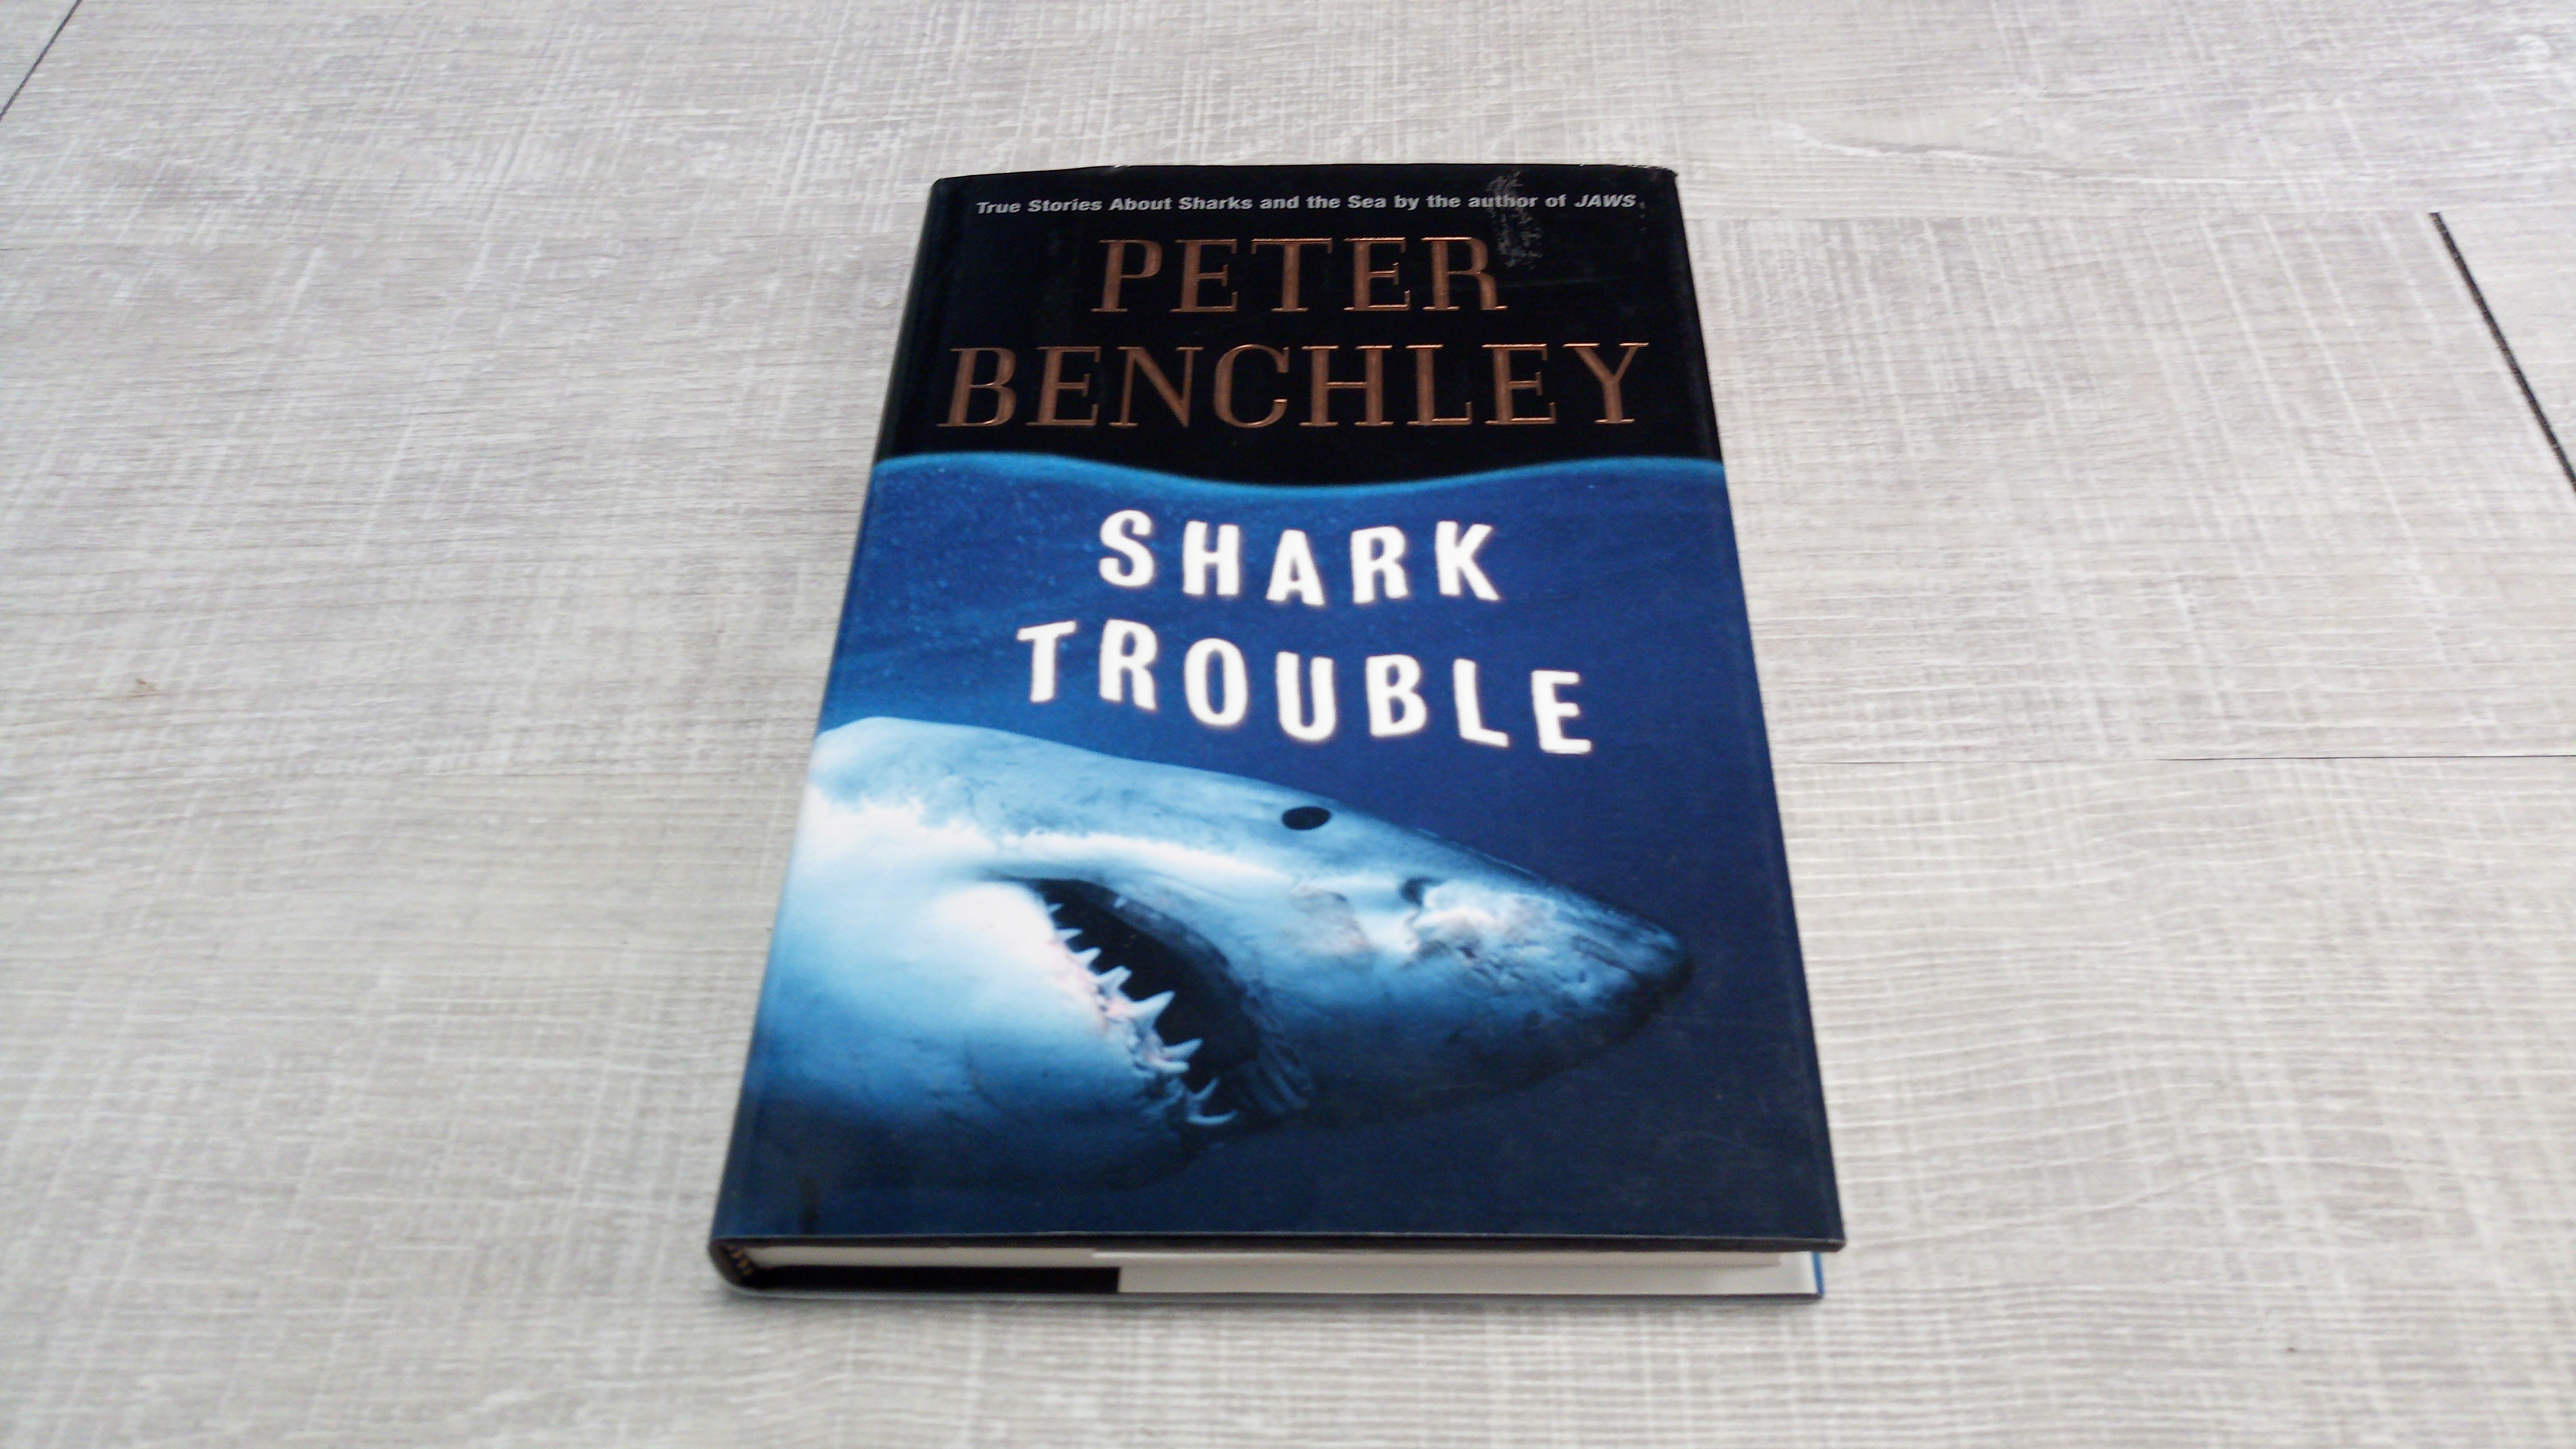 Peter Benchley - Shark Trouble